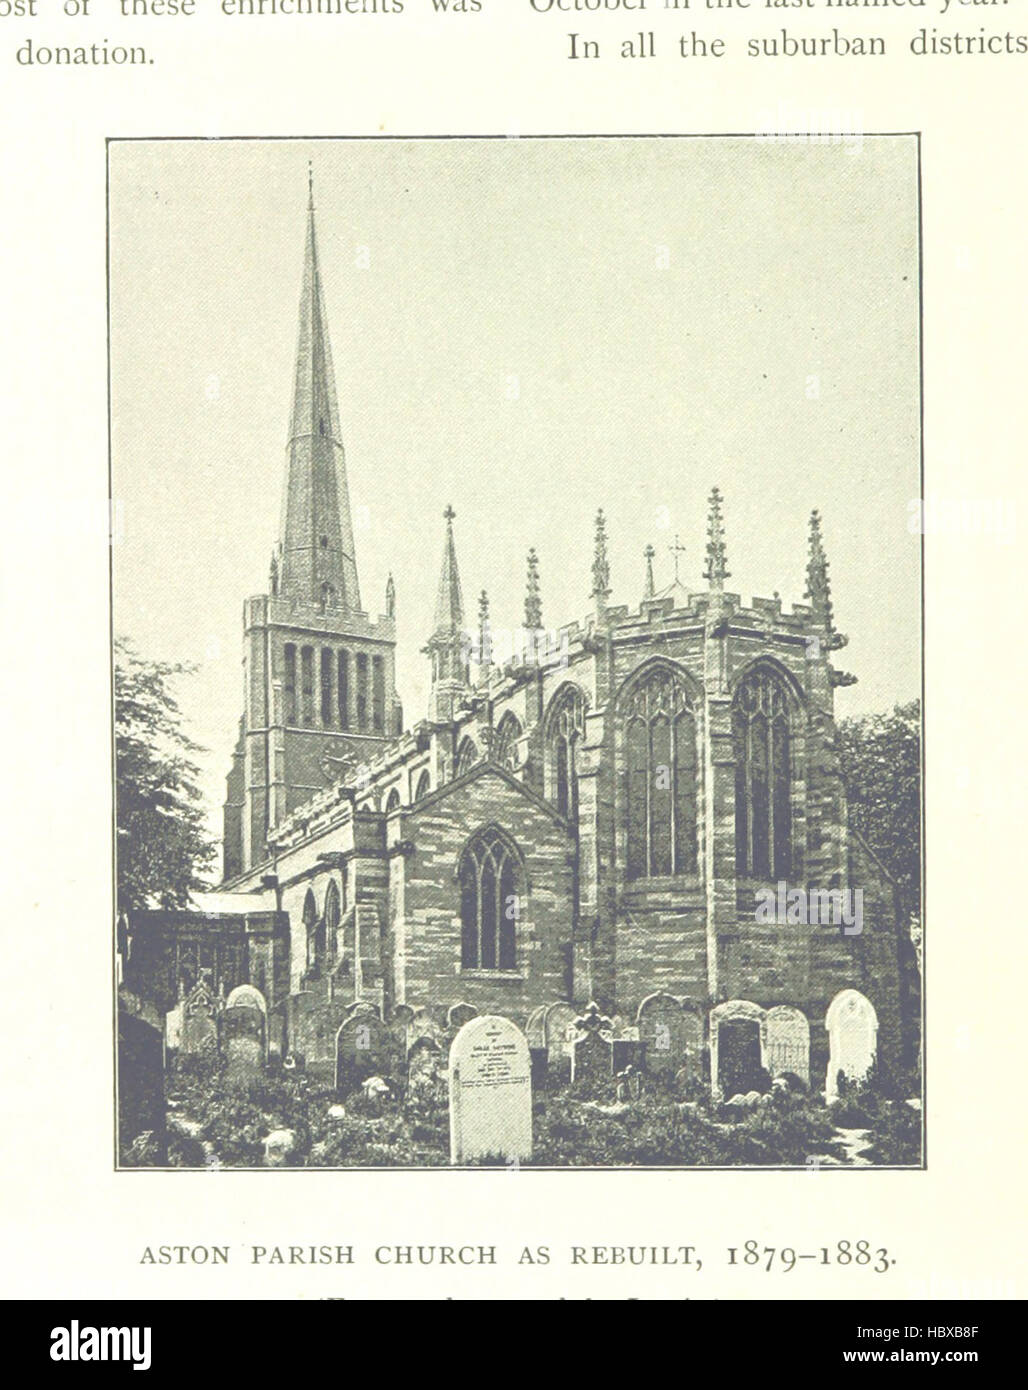 Image taken from page 578 of 'The Making of Birmingham: being a history of the rise and growth of the Midland metropolis ... With ... illustrations, etc' Image taken from page 578 of 'The Making of Birmingham Stock Photo